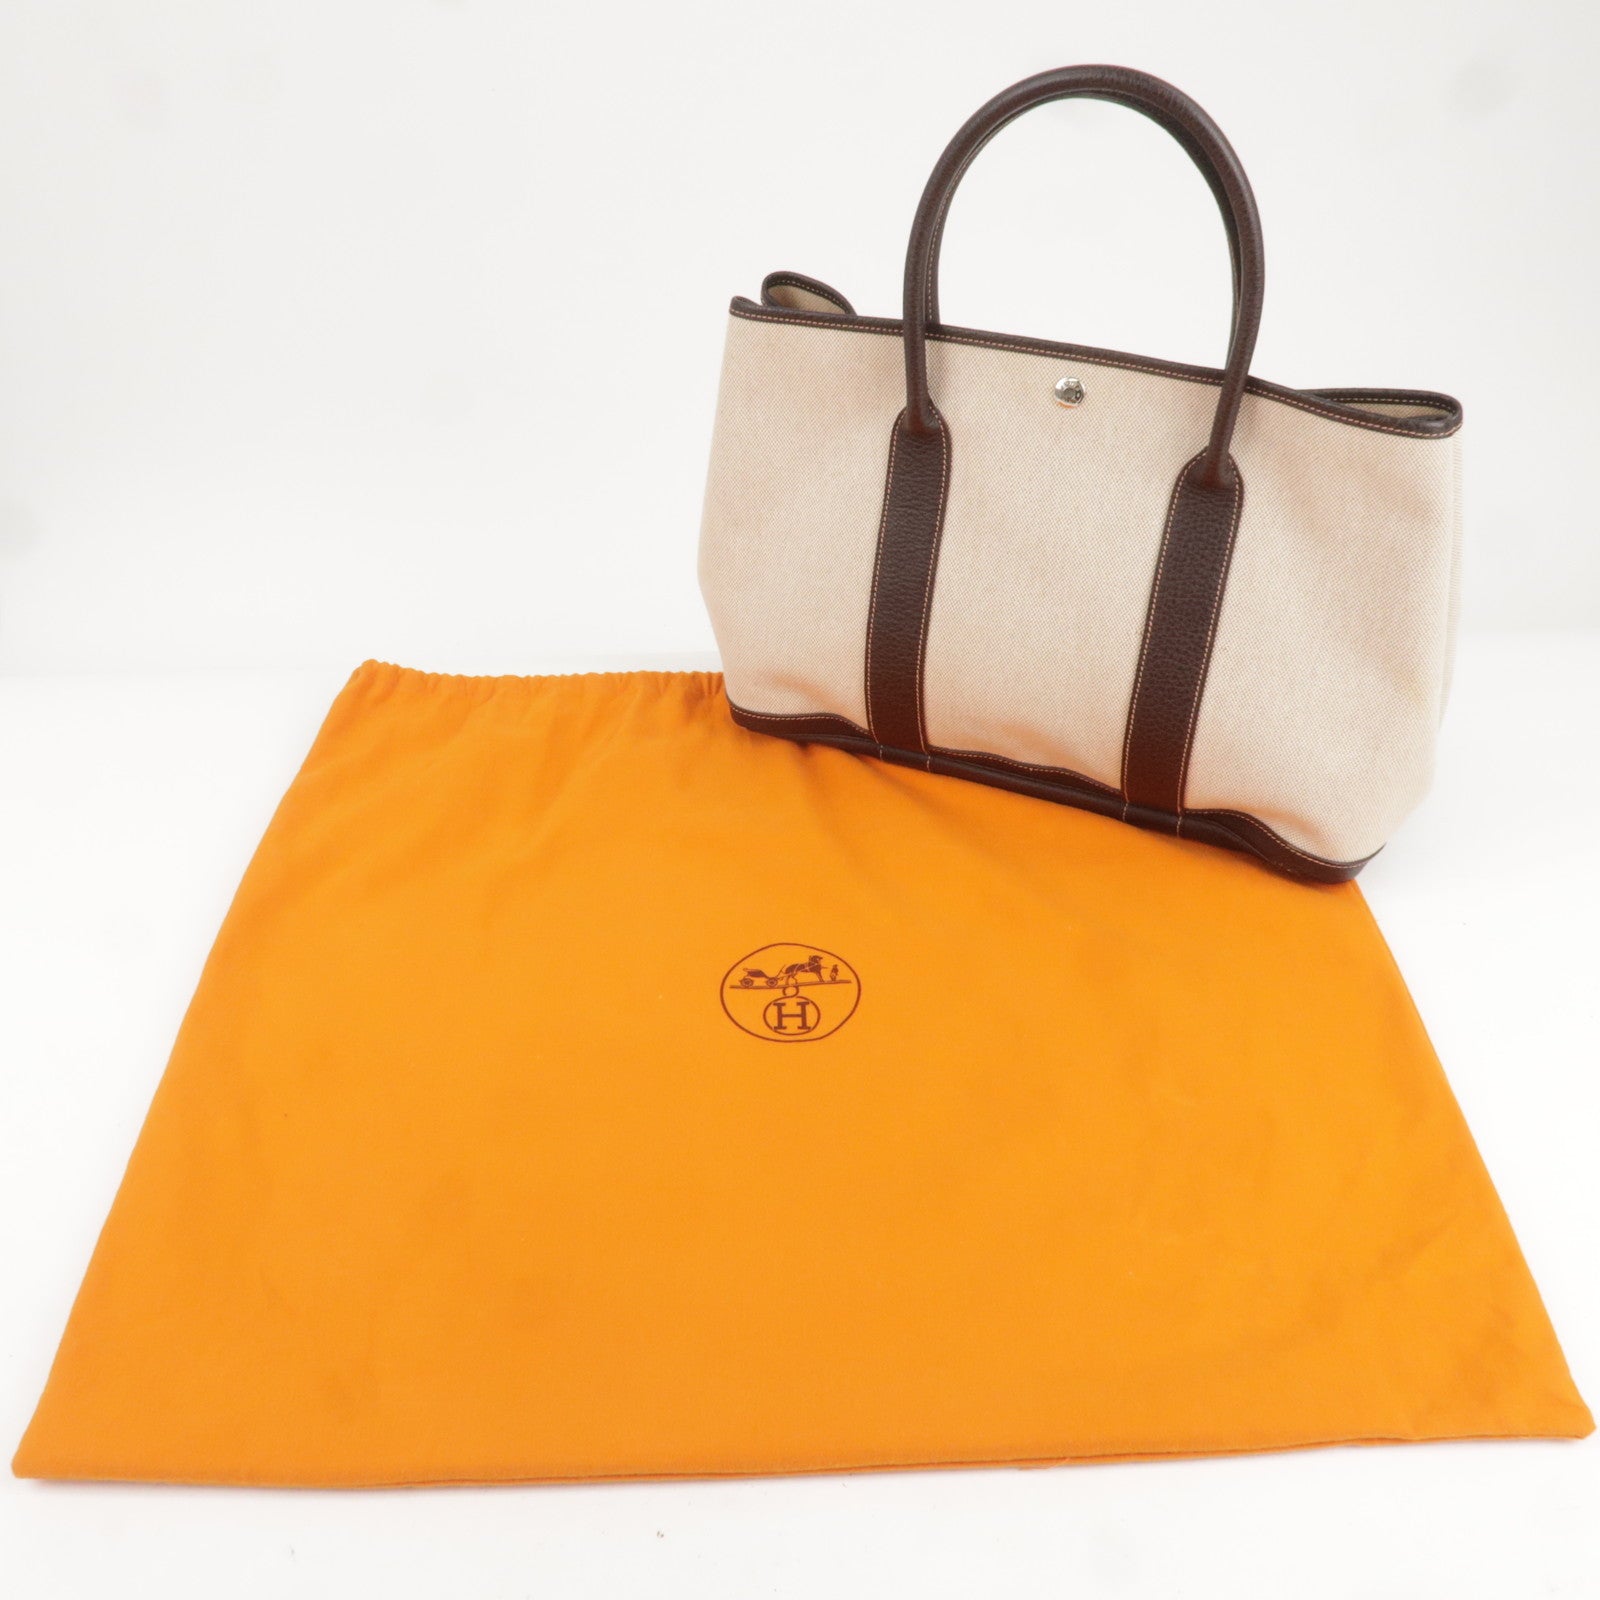 Hermes Garden Party Toile Leather Tote Bag